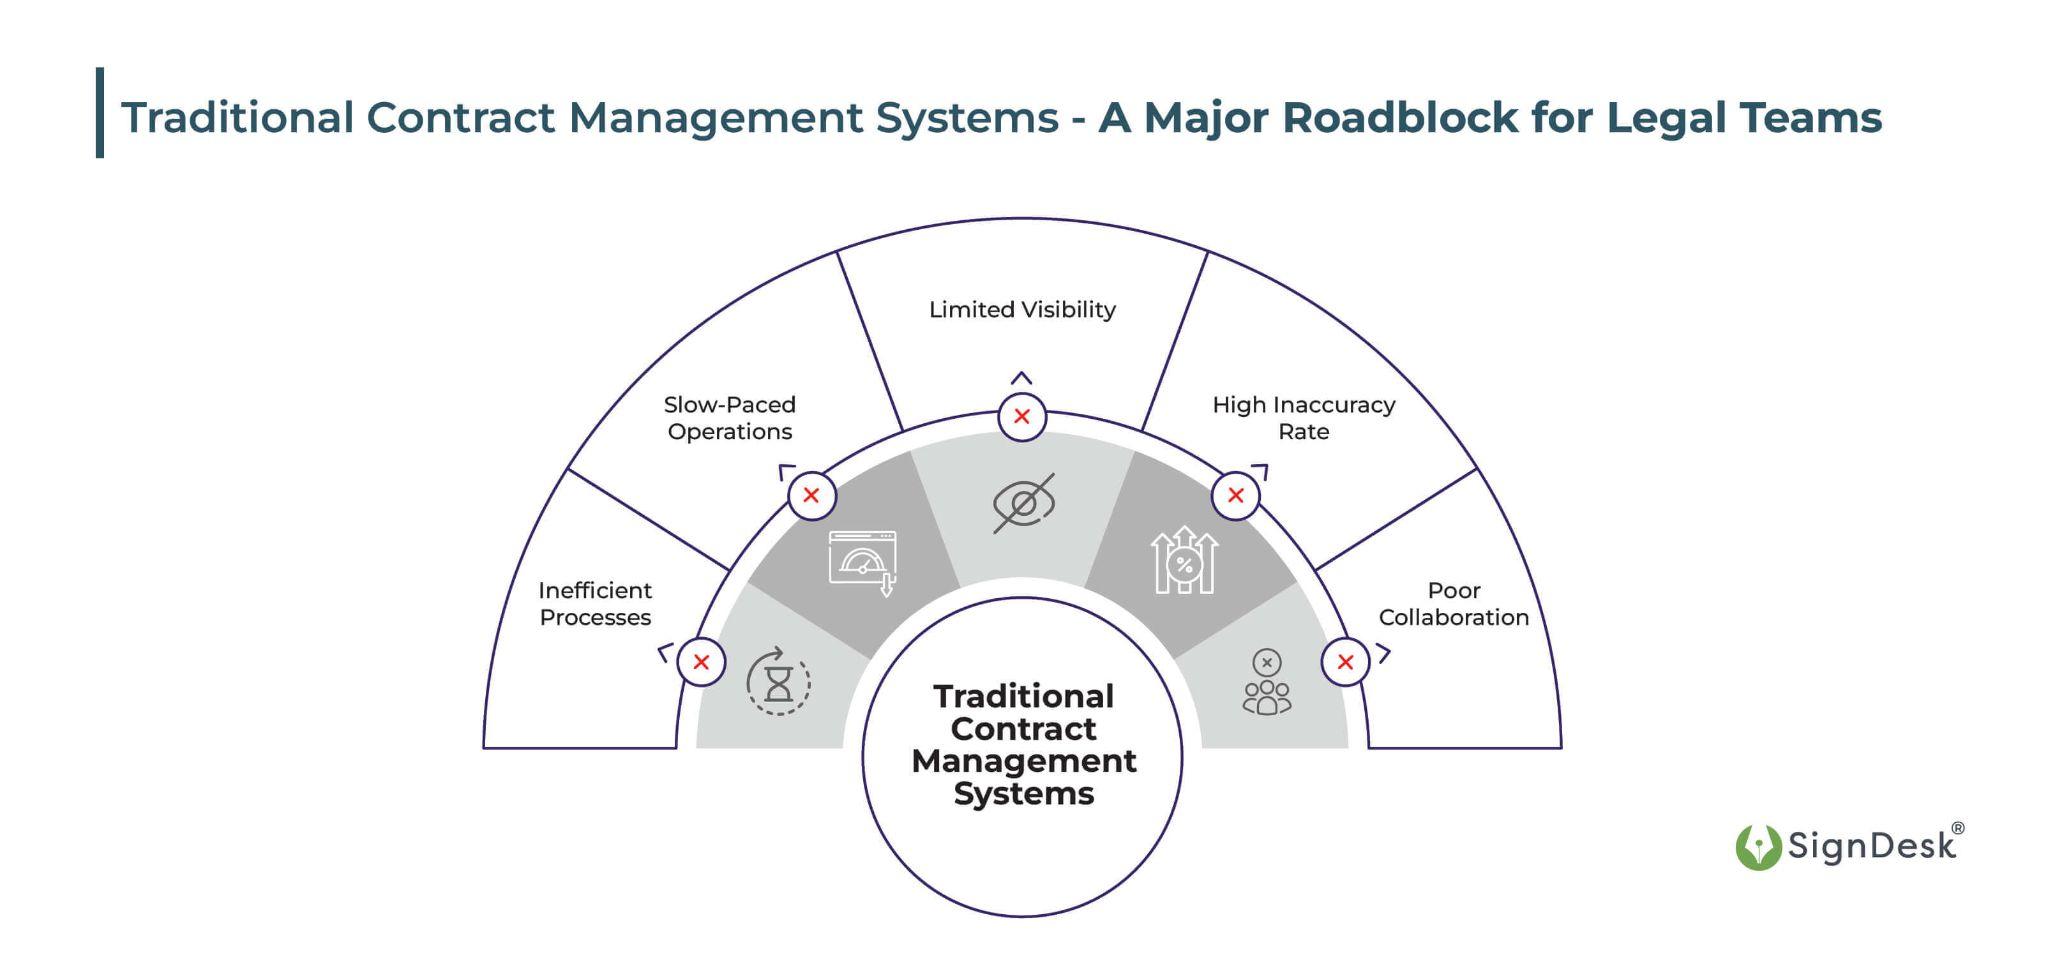 Traditional Contract Management Systems - A Major Roadblock for Legal Teams